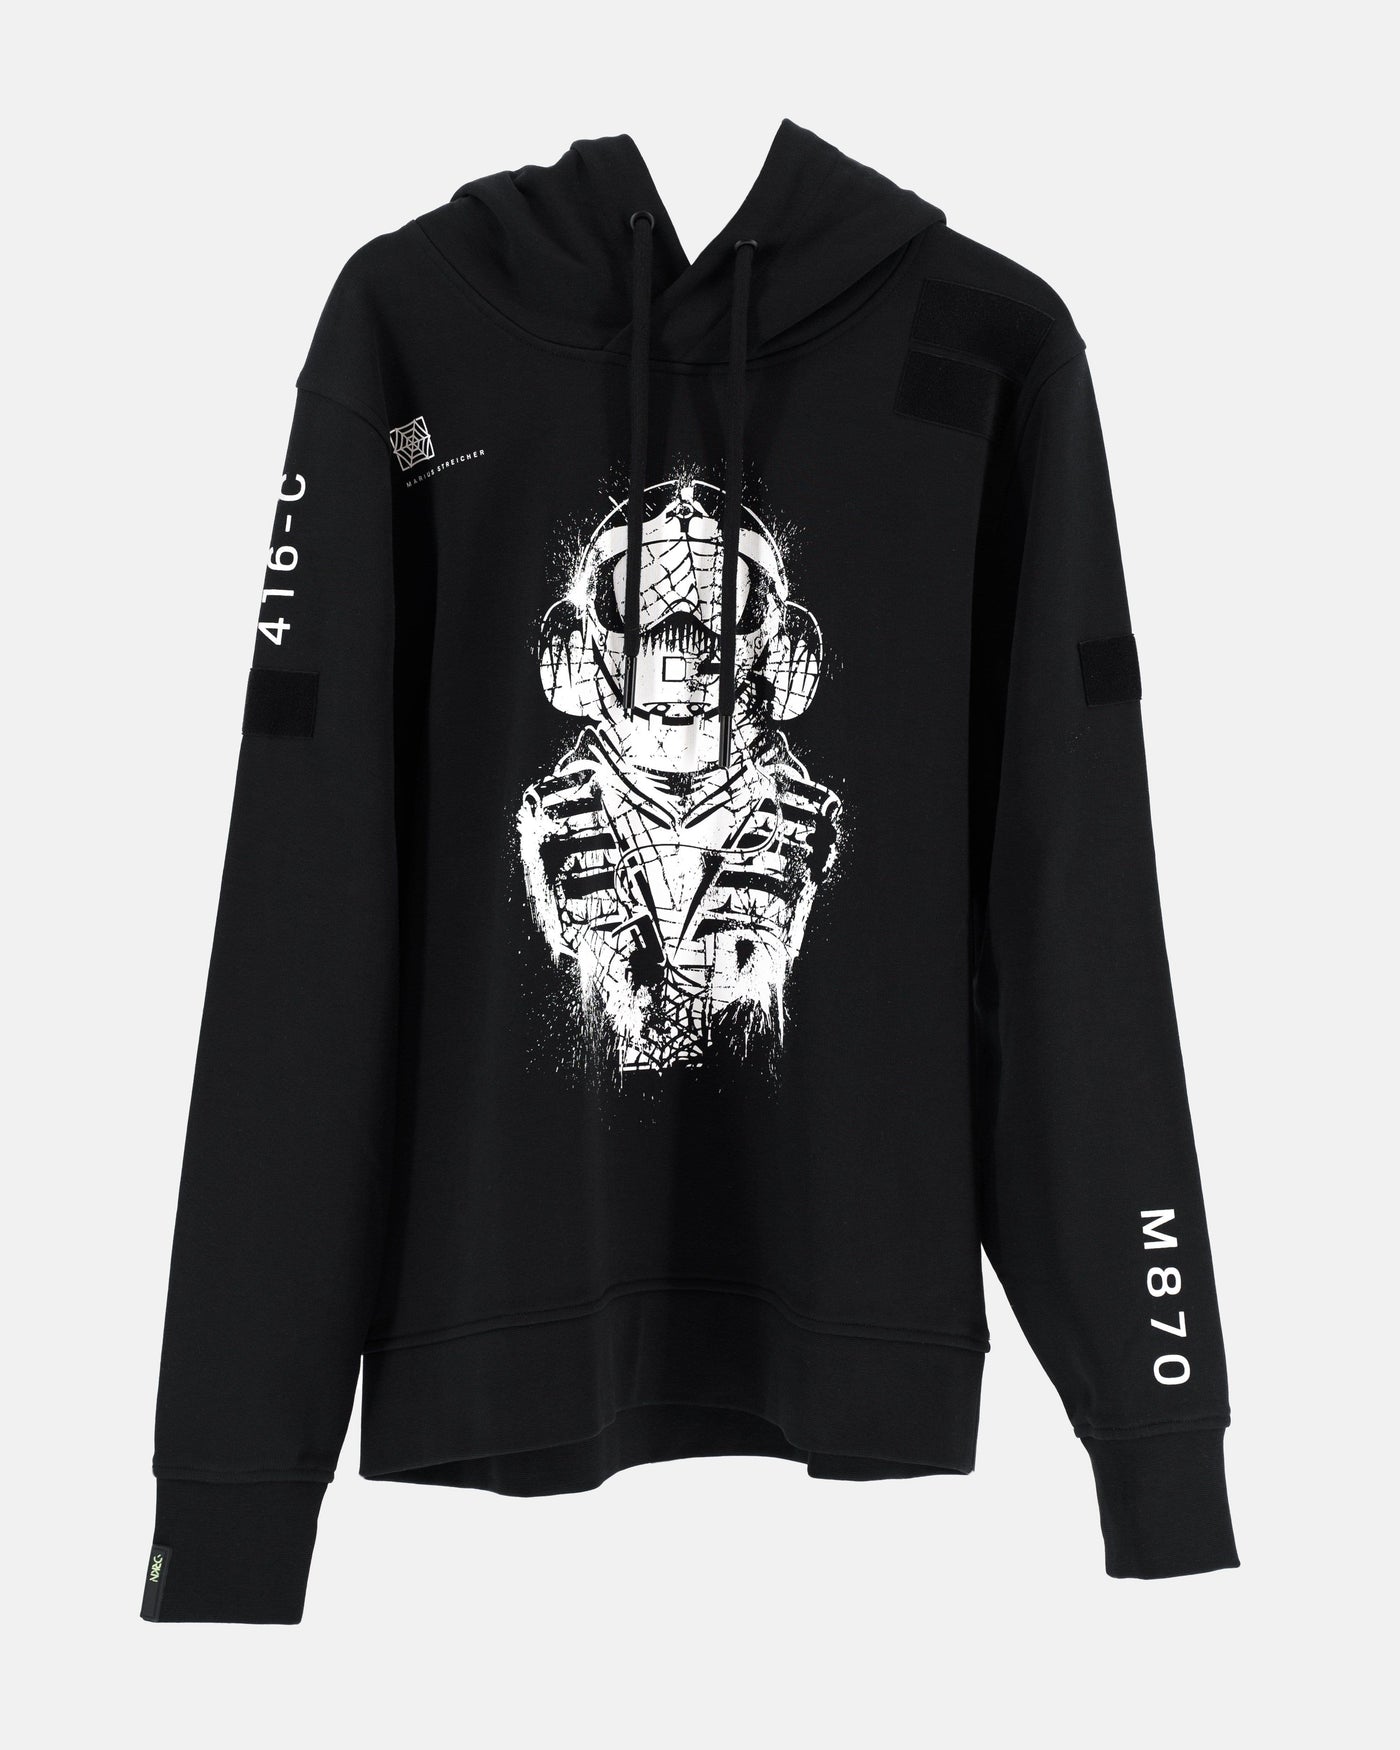 Black and white hoodie with jager print from the game Rainbow Six.